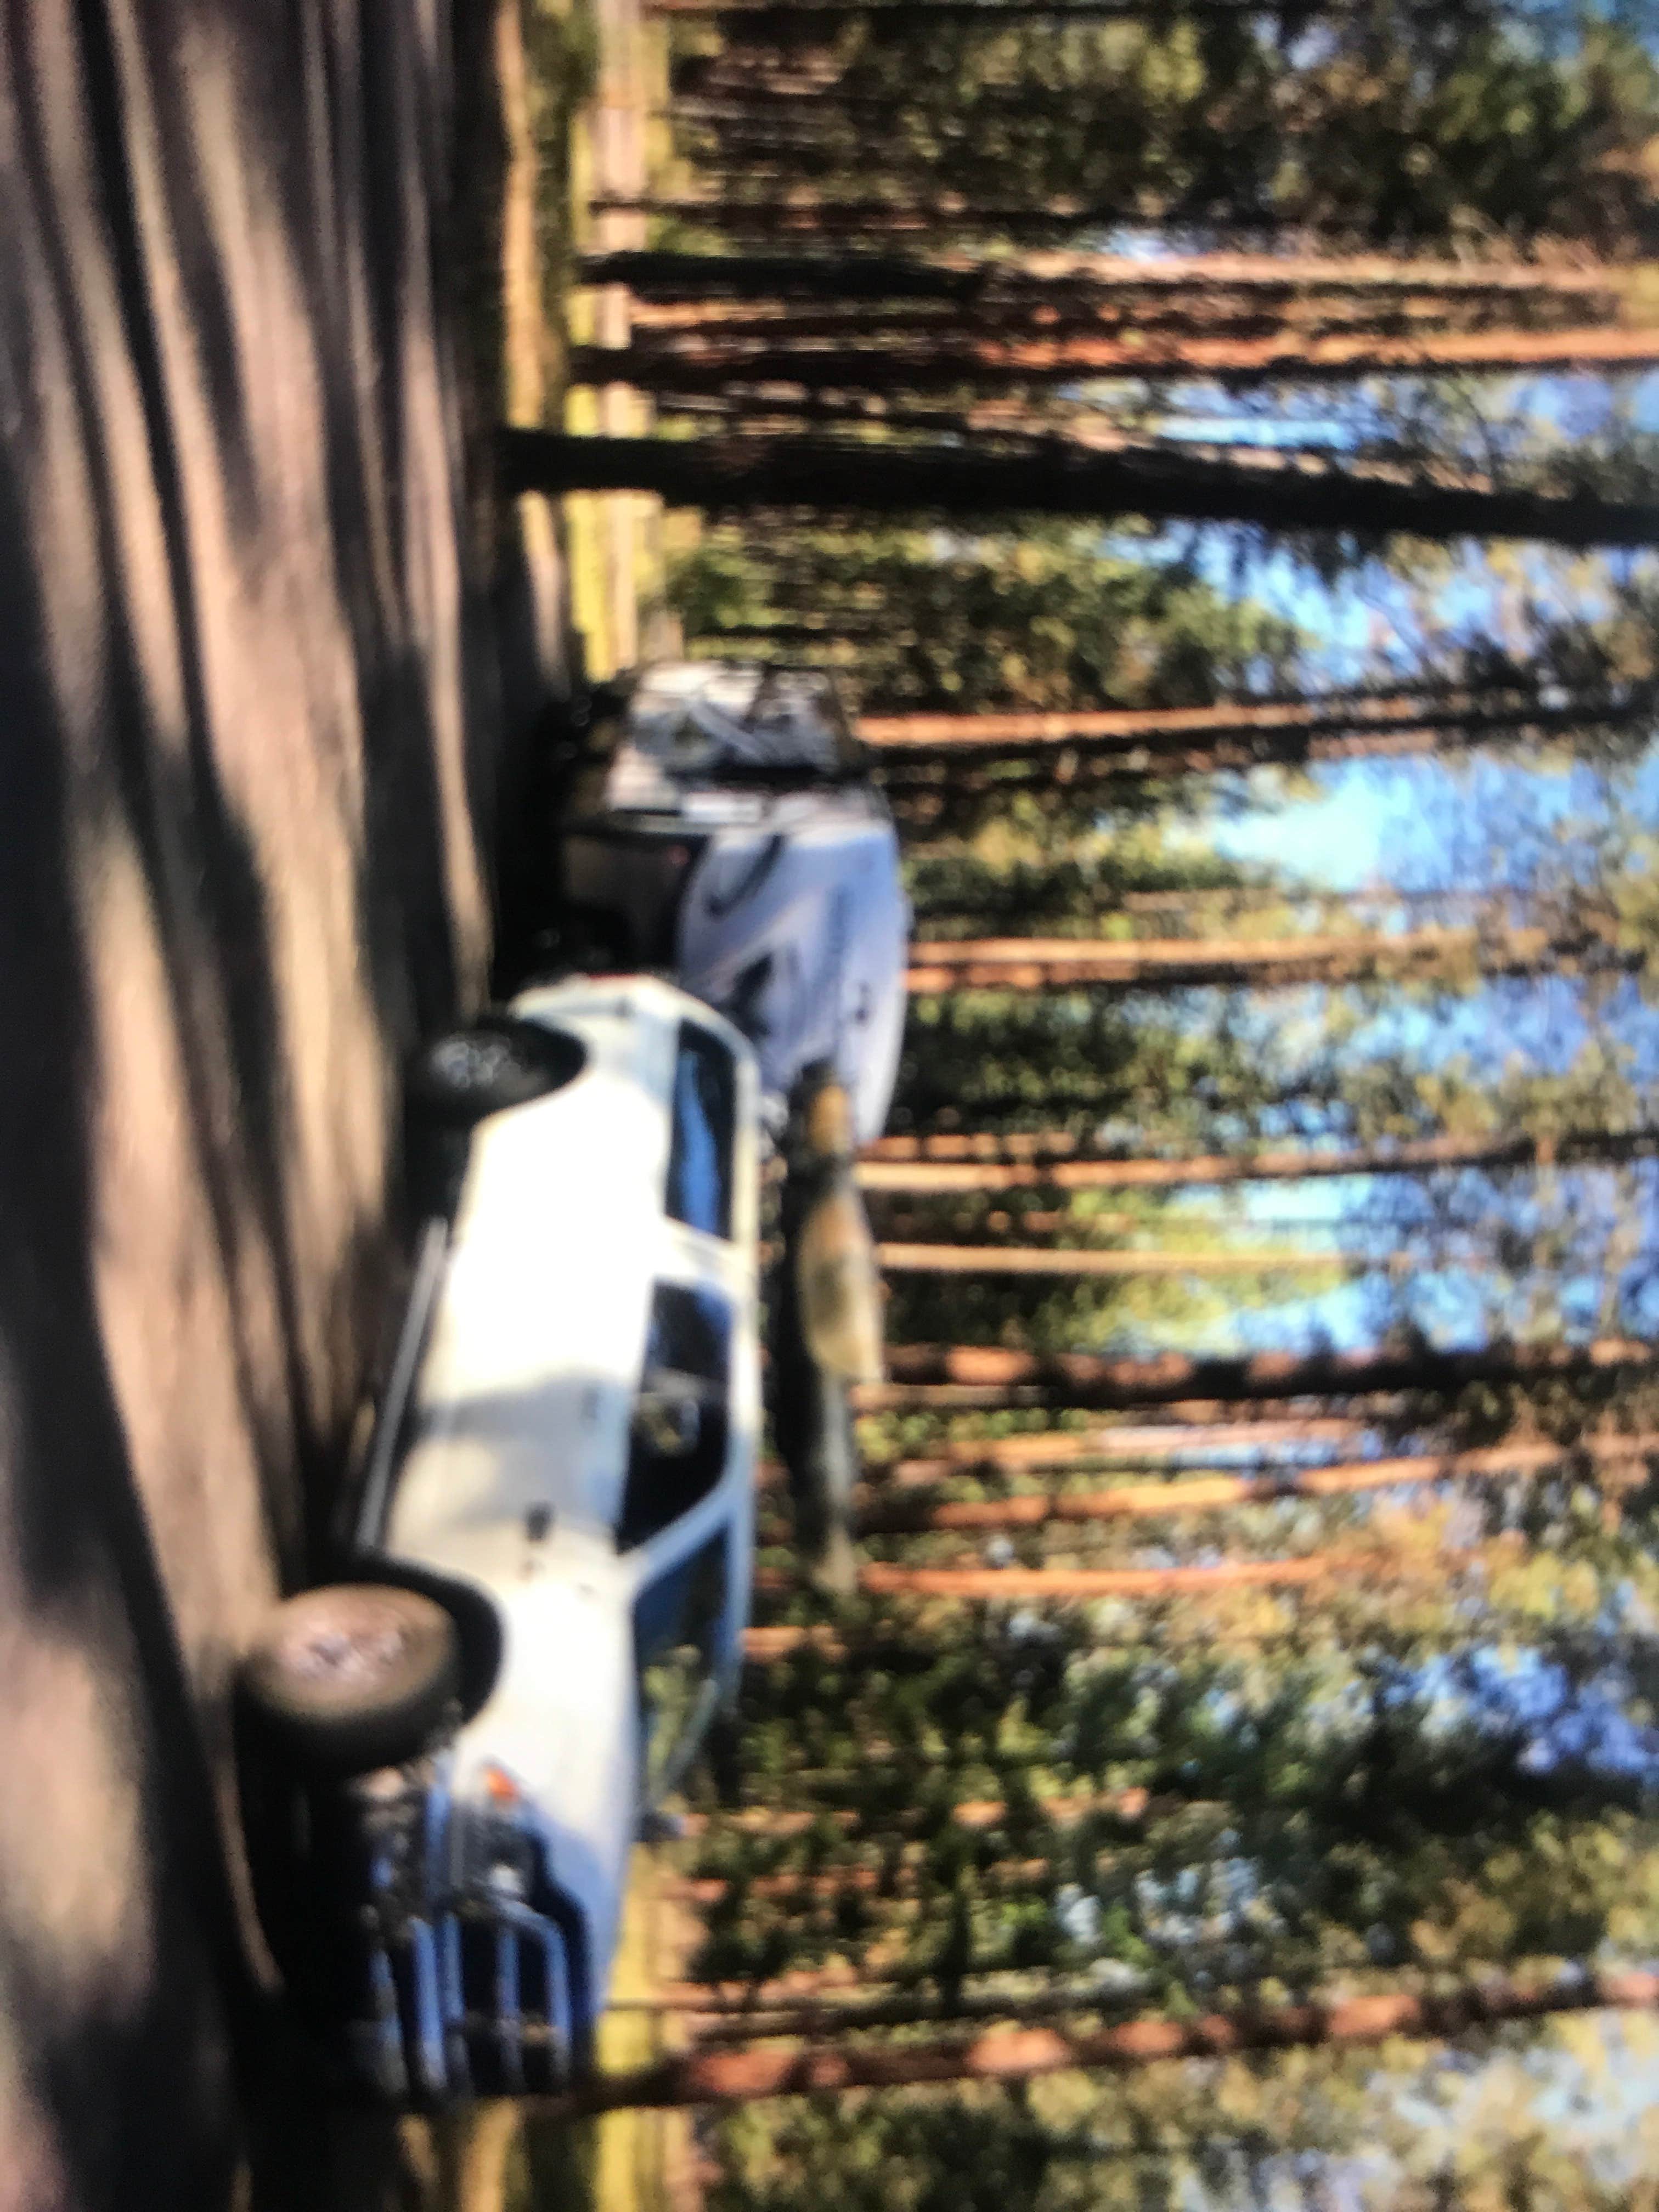 Camper submitted image from Quartz Flat Campground - 2